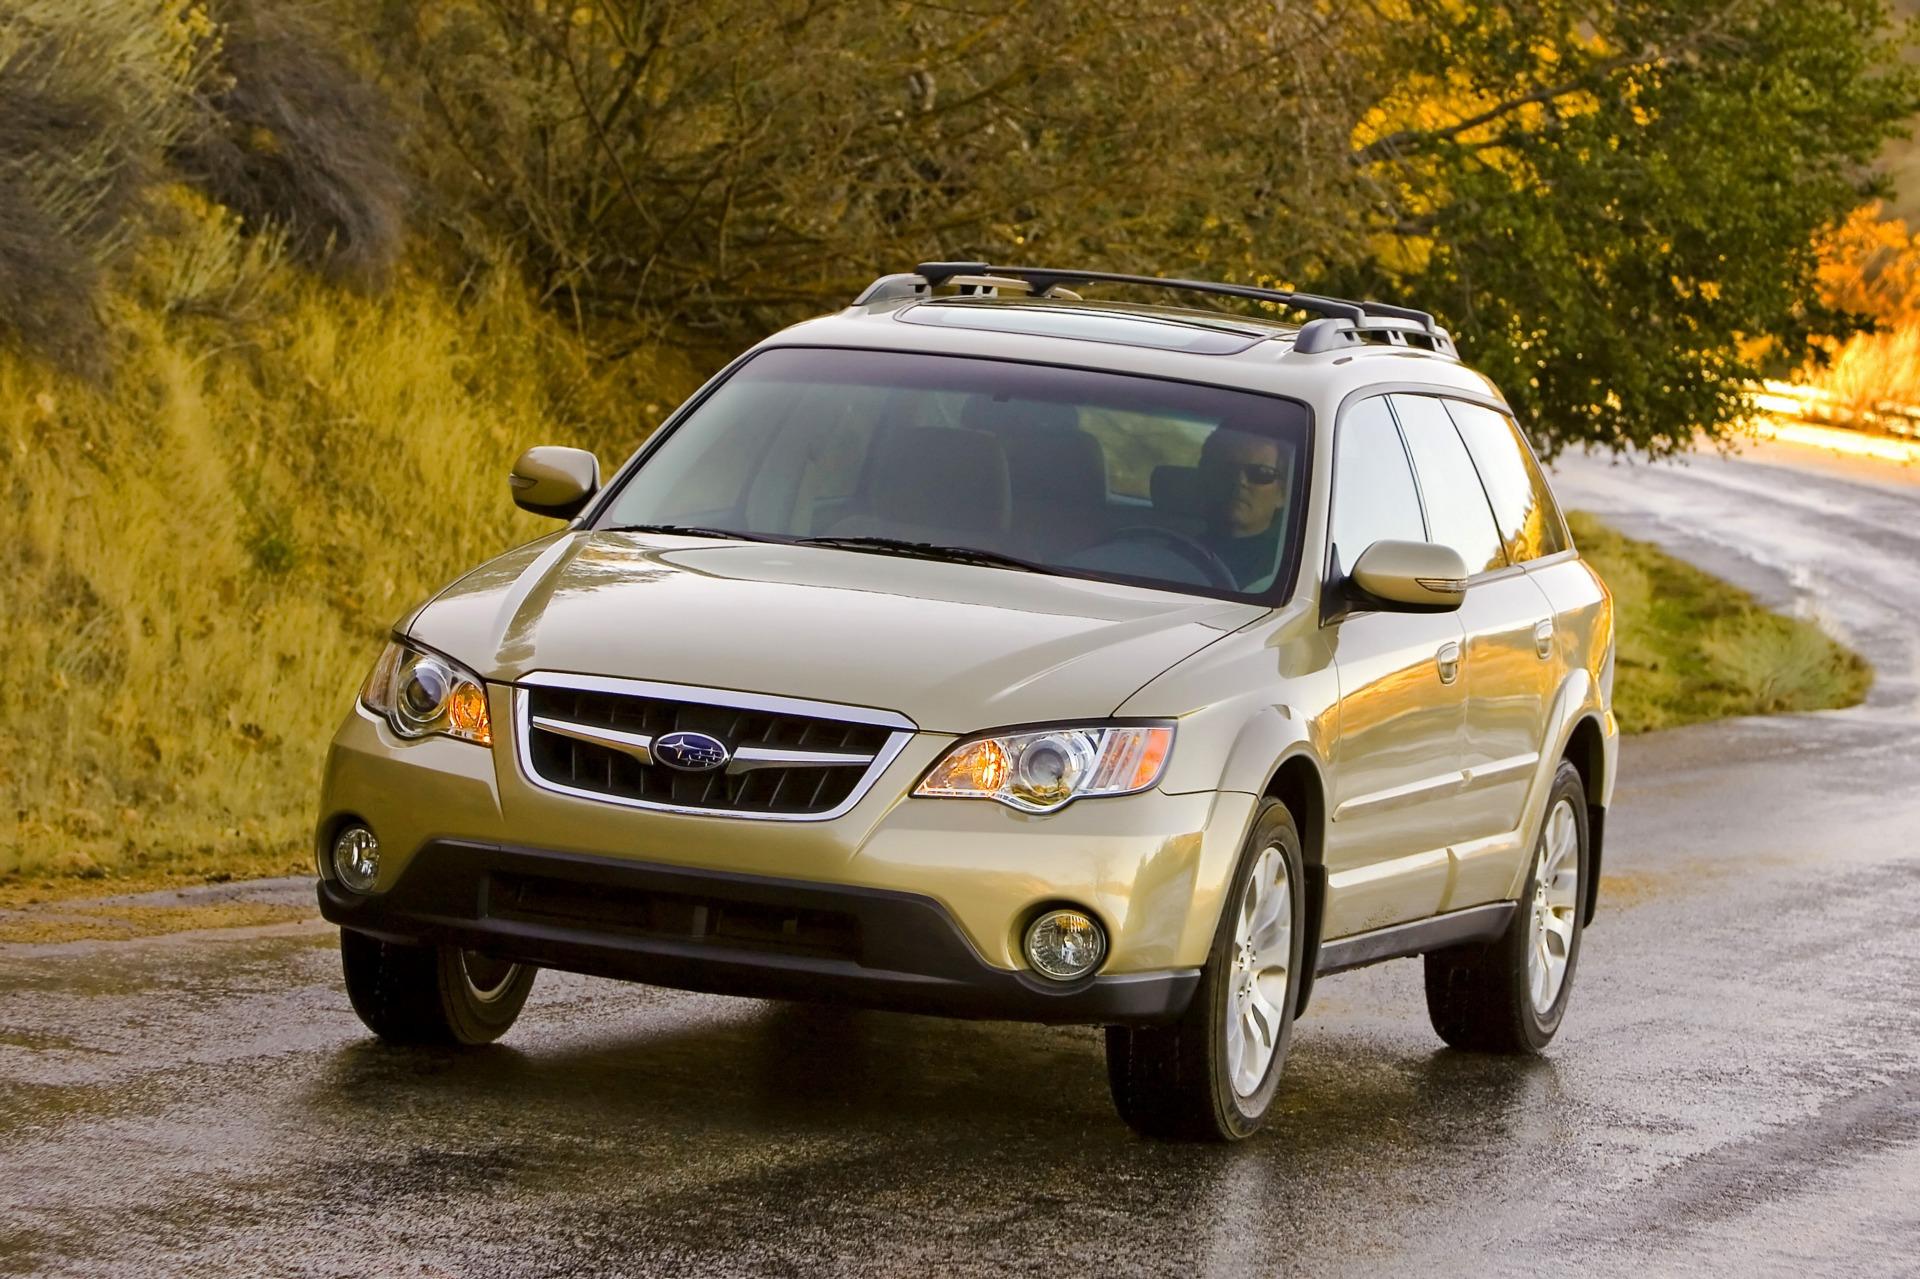 2009 Subaru Outback 3.0 R Limited News and Information